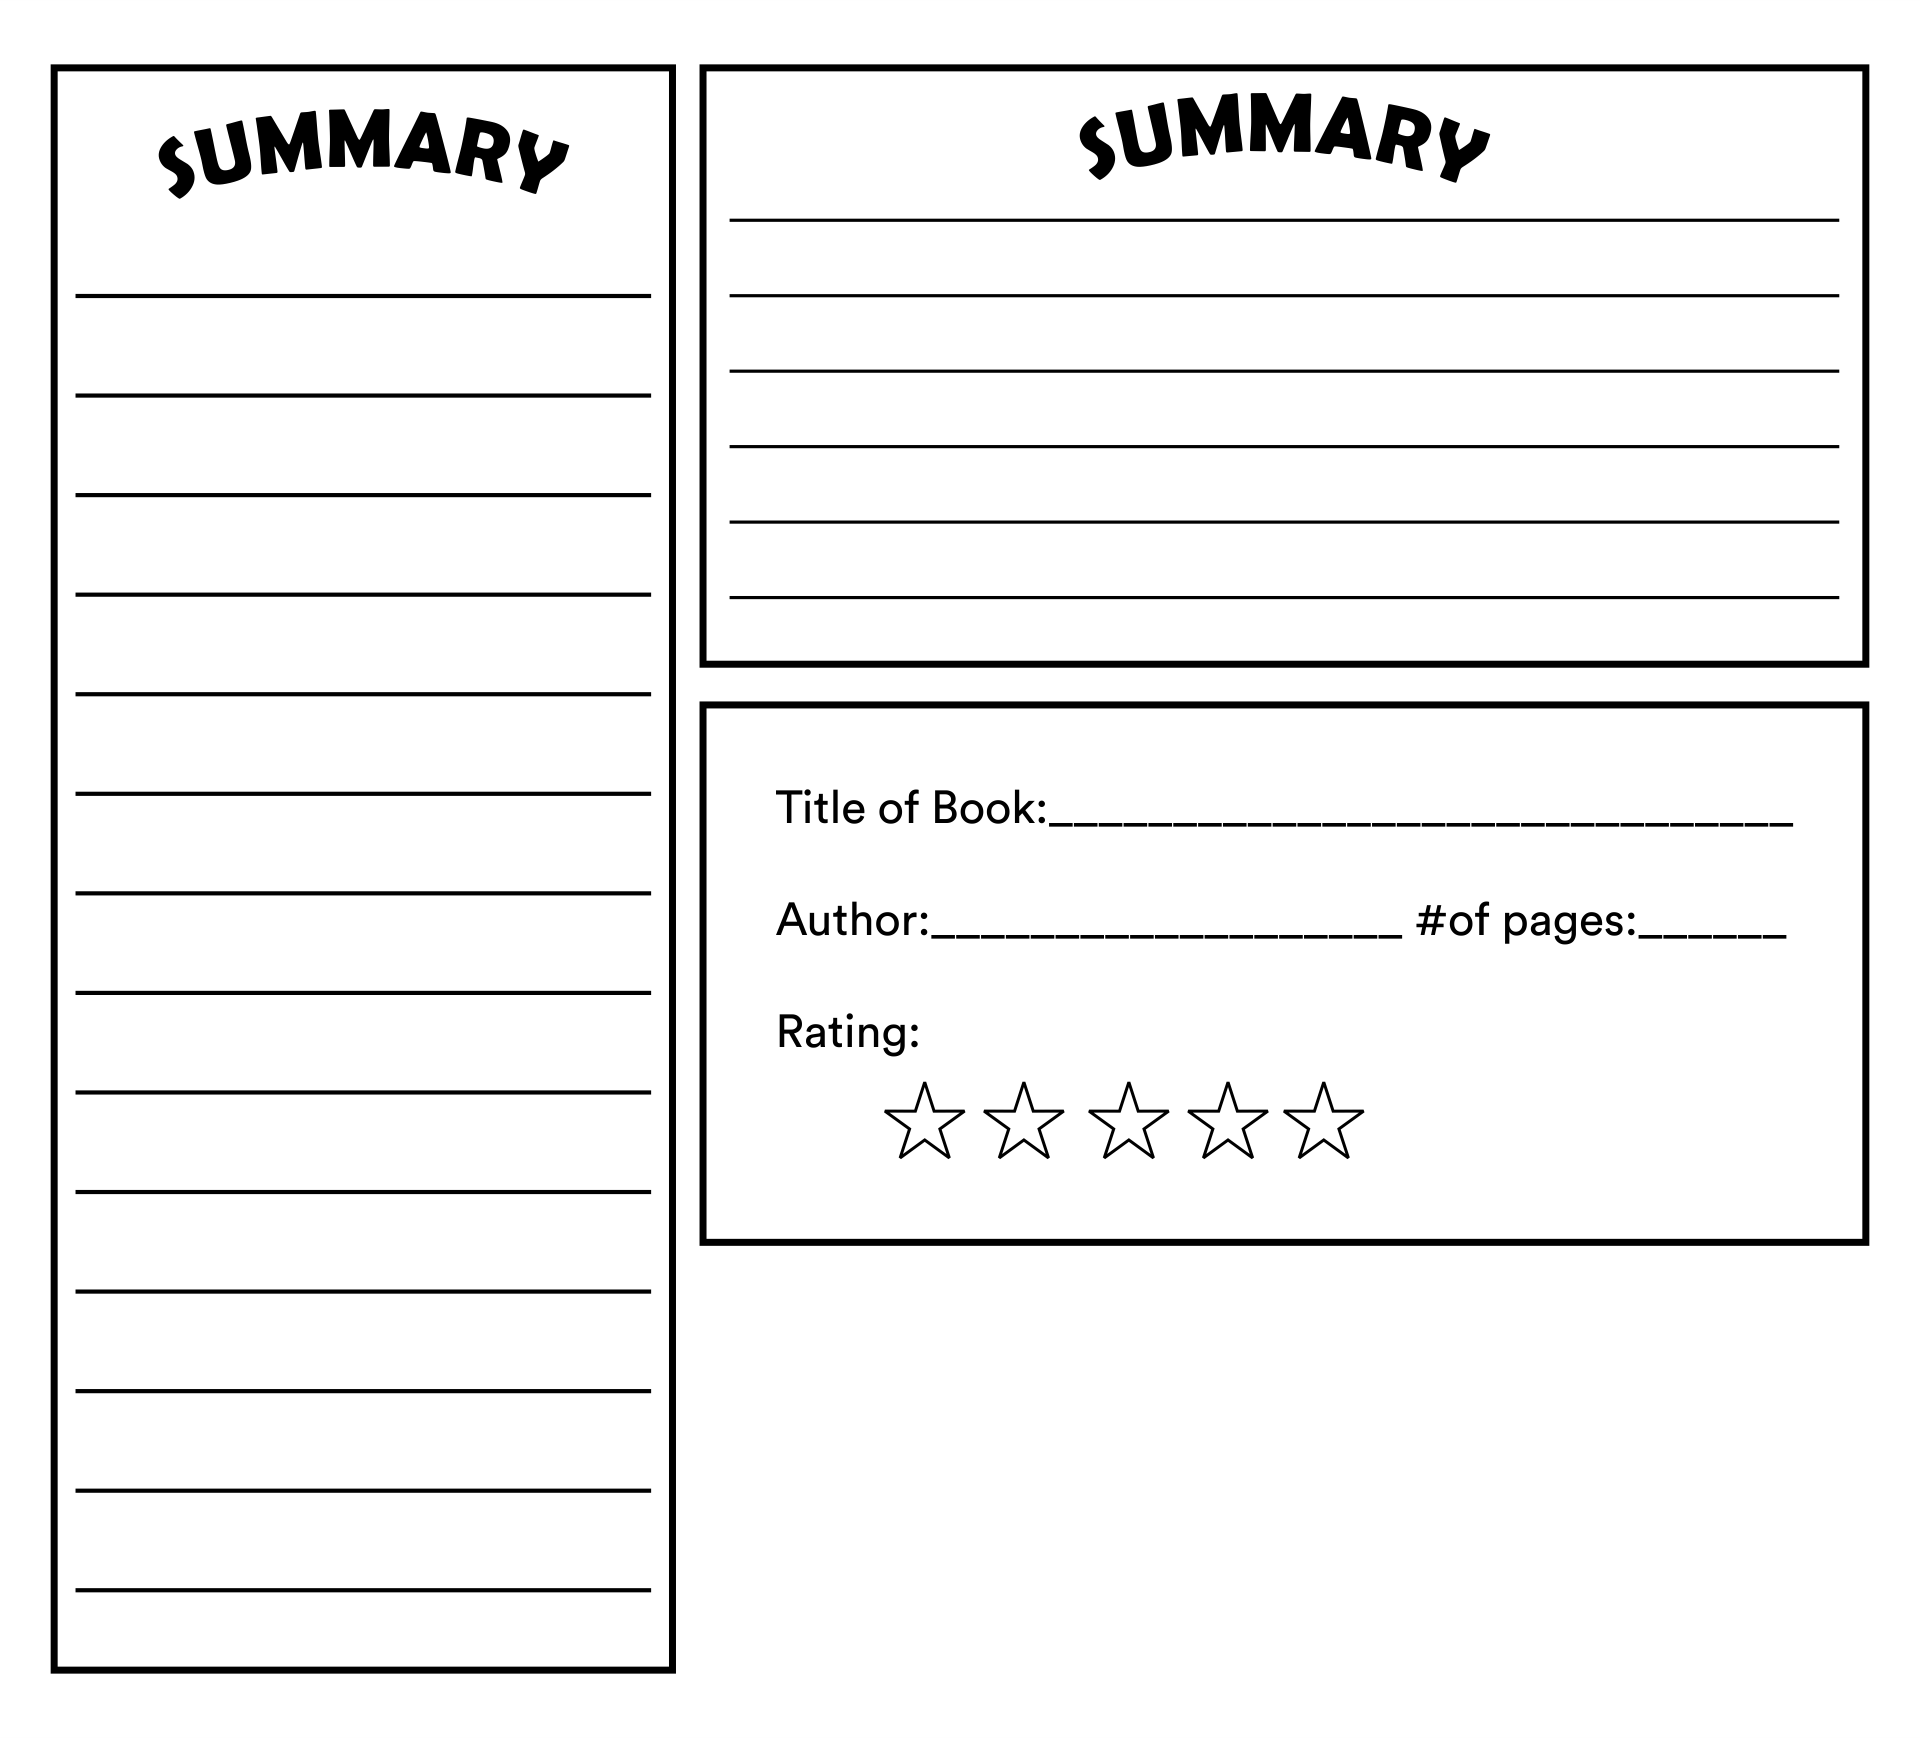 Cereal Box Book Report Template